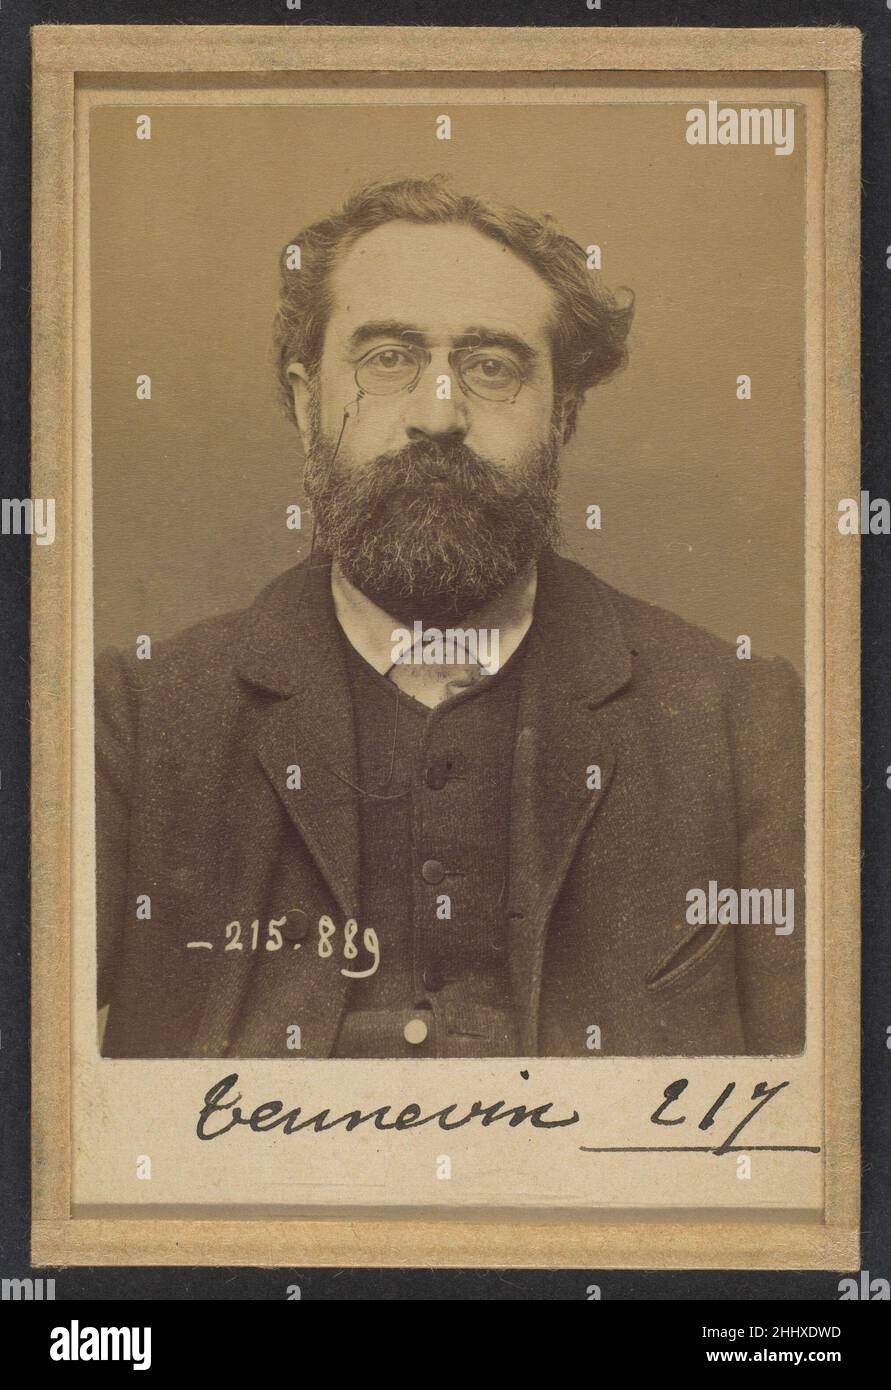 Tennevin. Alexandre. 48 ans, né à Paris. Comptable. Anarchiste. 19/3/94. 1894 Alphonse Bertillon Born into a distinguished family of scientists and statisticians, Bertillon began his career as a clerk in the Identification Bureau of the Paris Prefecture of Police in 1879. Tasked with maintaining reliable police records of offenders, he developed the first modern system of criminal identification. The system, which became known as Bertillonage, had three components: anthropometric measurement, precise verbal description of the prisoner’s physical characteristics, and standardized photographs of Stock Photo